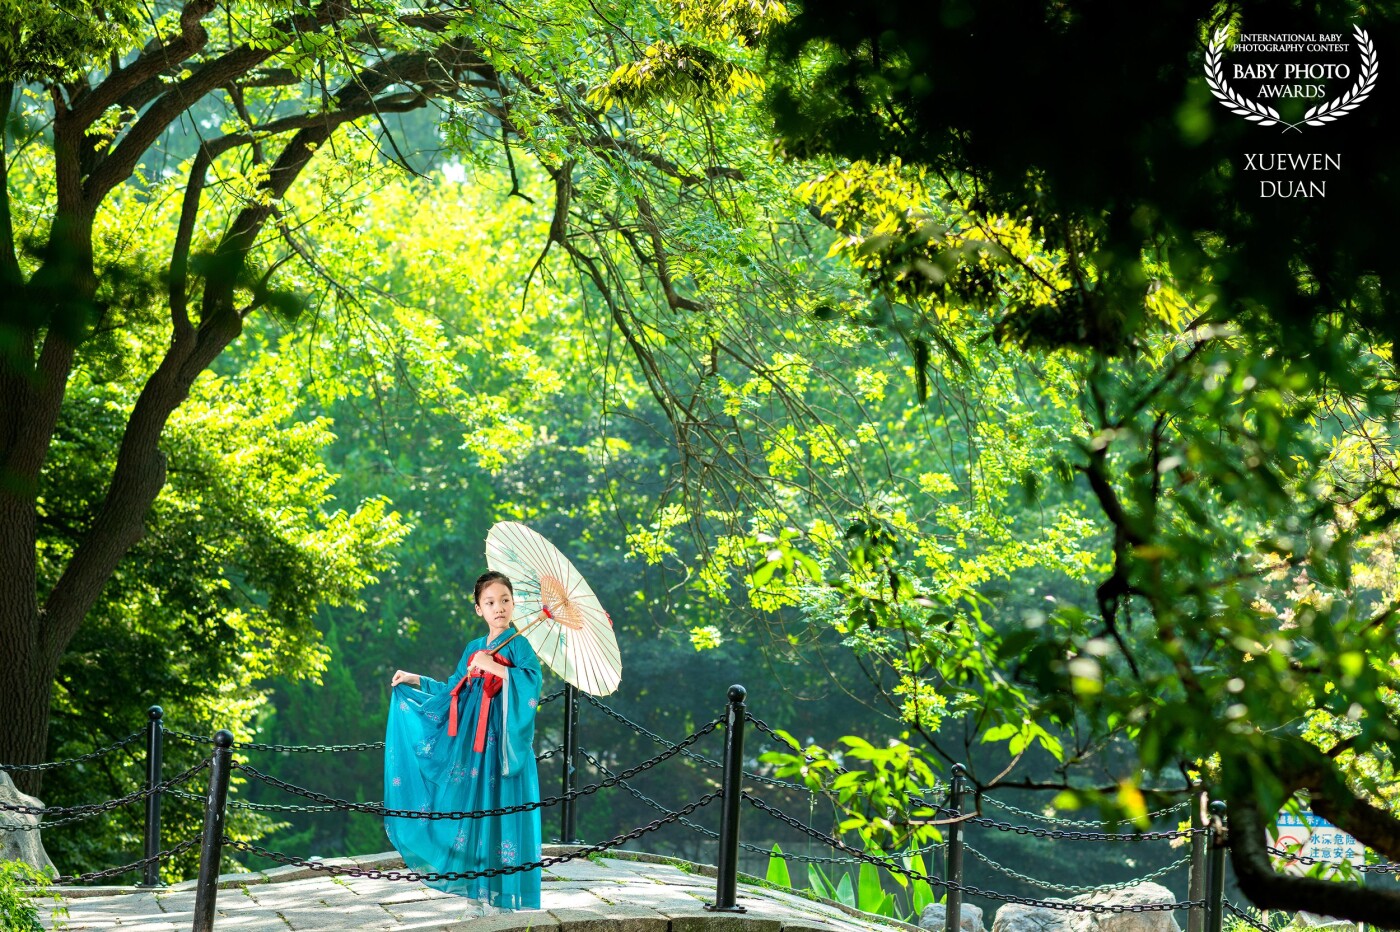 Stone bridges, ancient trees and railings, Yan Yan is bathed in the sunshine in September. She leans on the railings and looks green. She is a beauty.